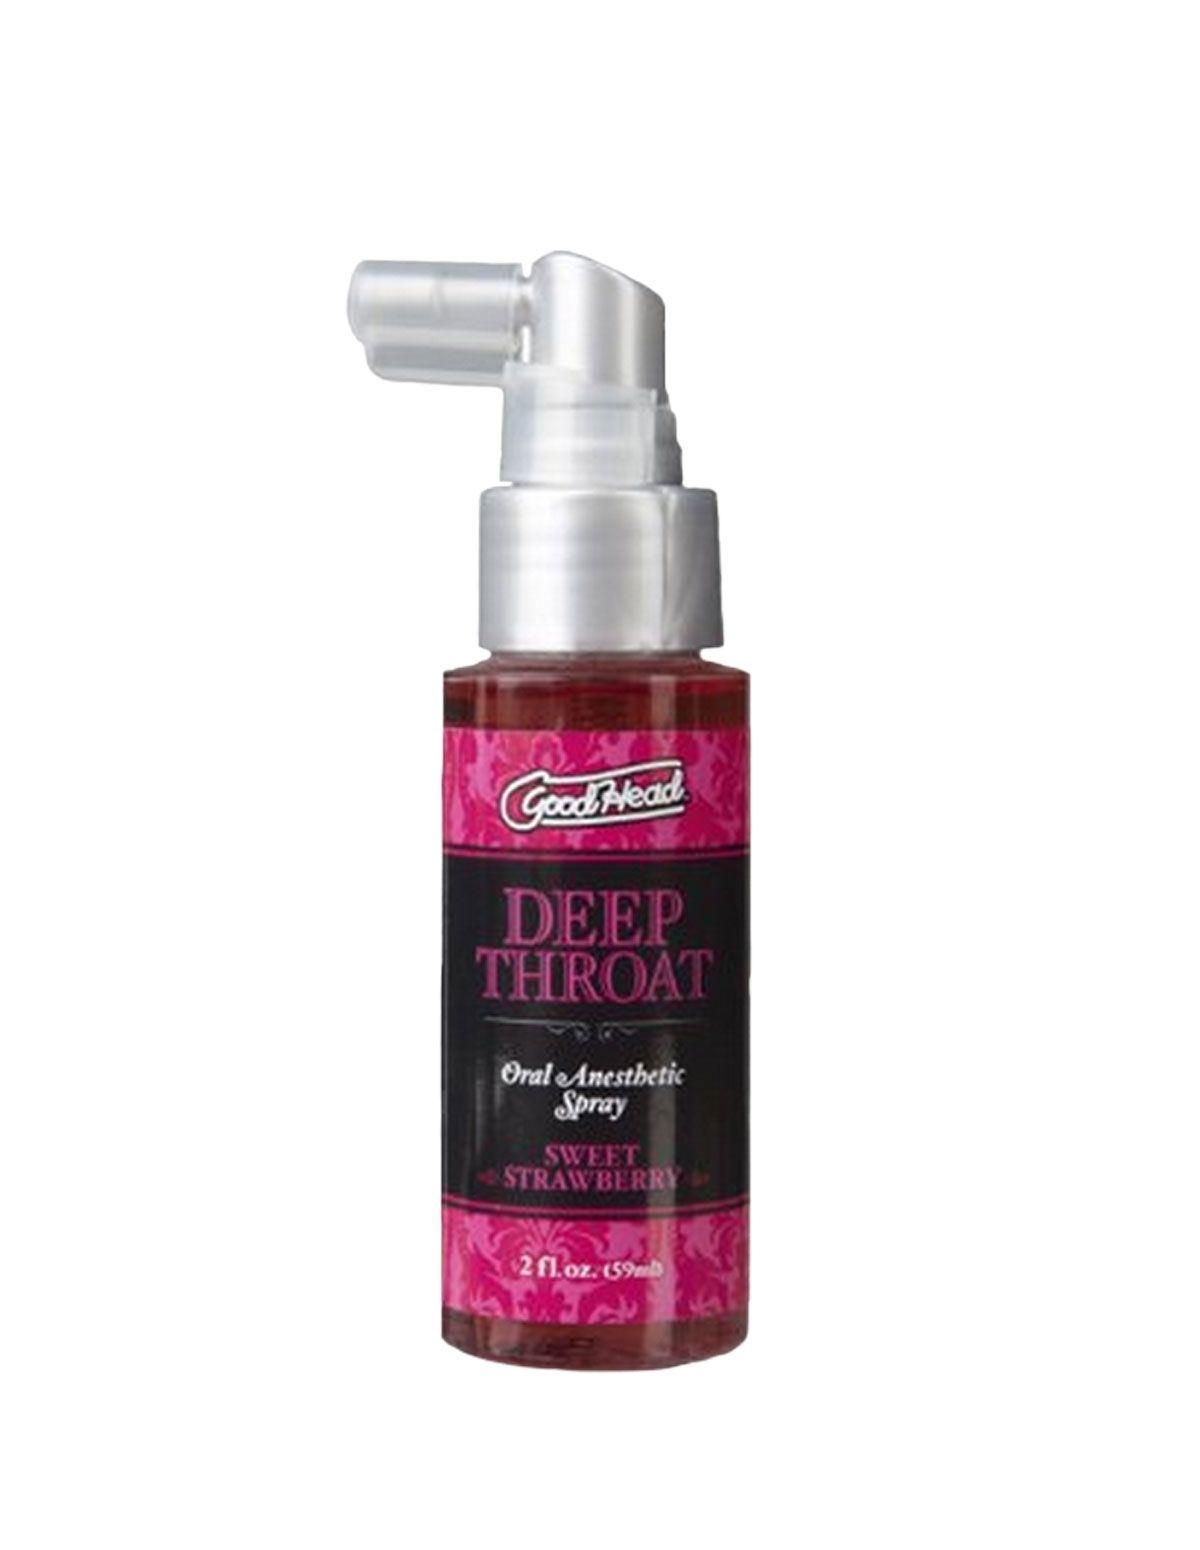 Dragonfly reccomend Deepthroat lube product